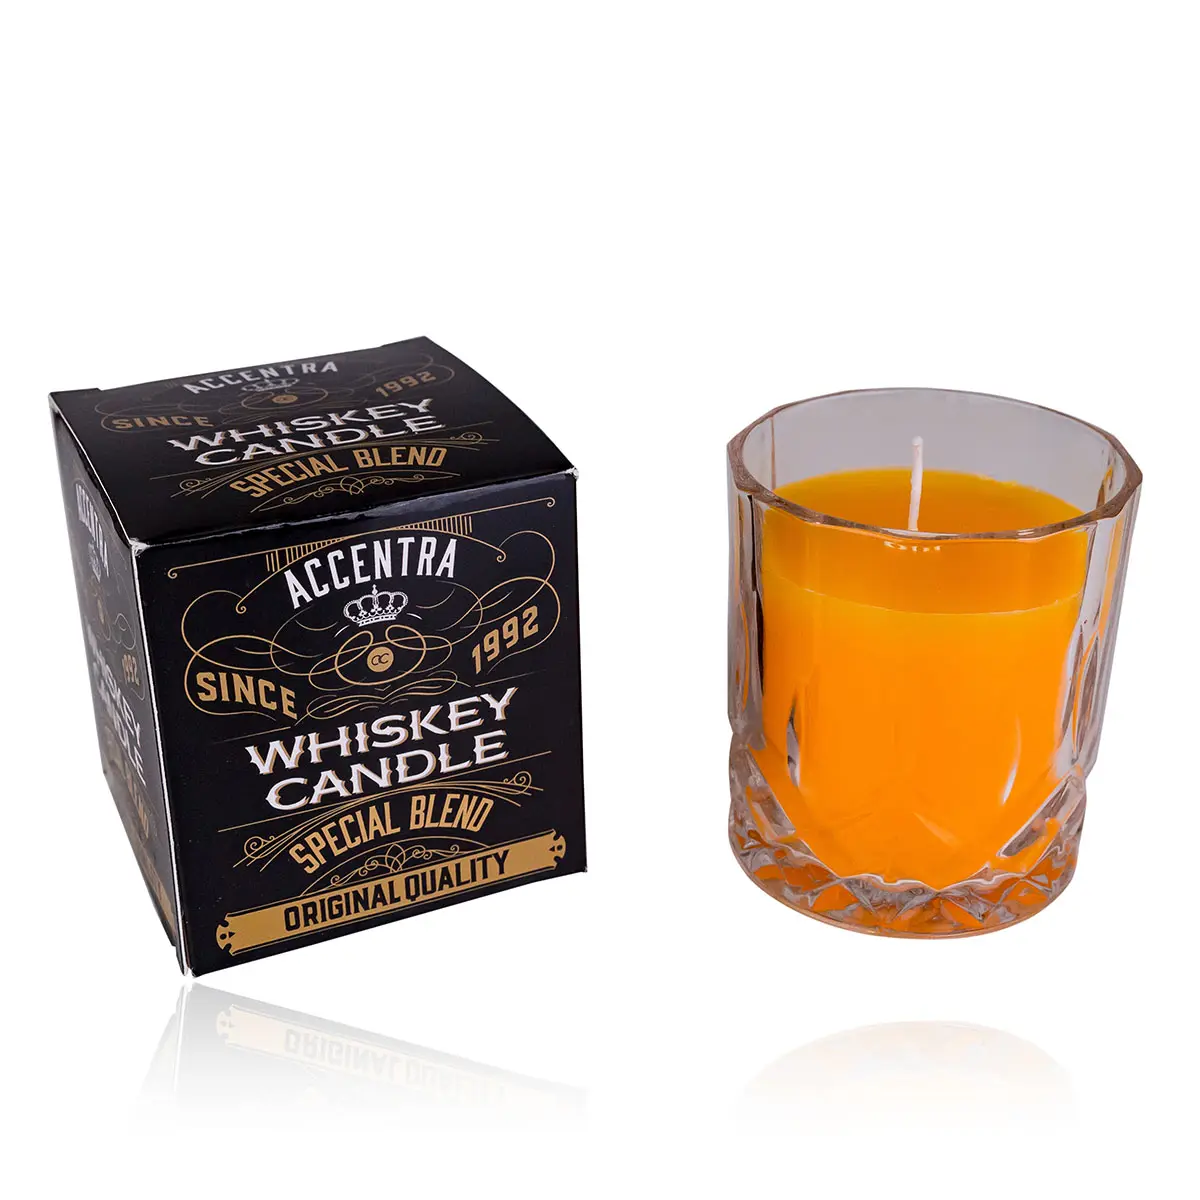 Accentra scented candle WHISKEY in glass with gift box, 360g, 8.5 x 7cm, fragrance: whiskey, color: orange